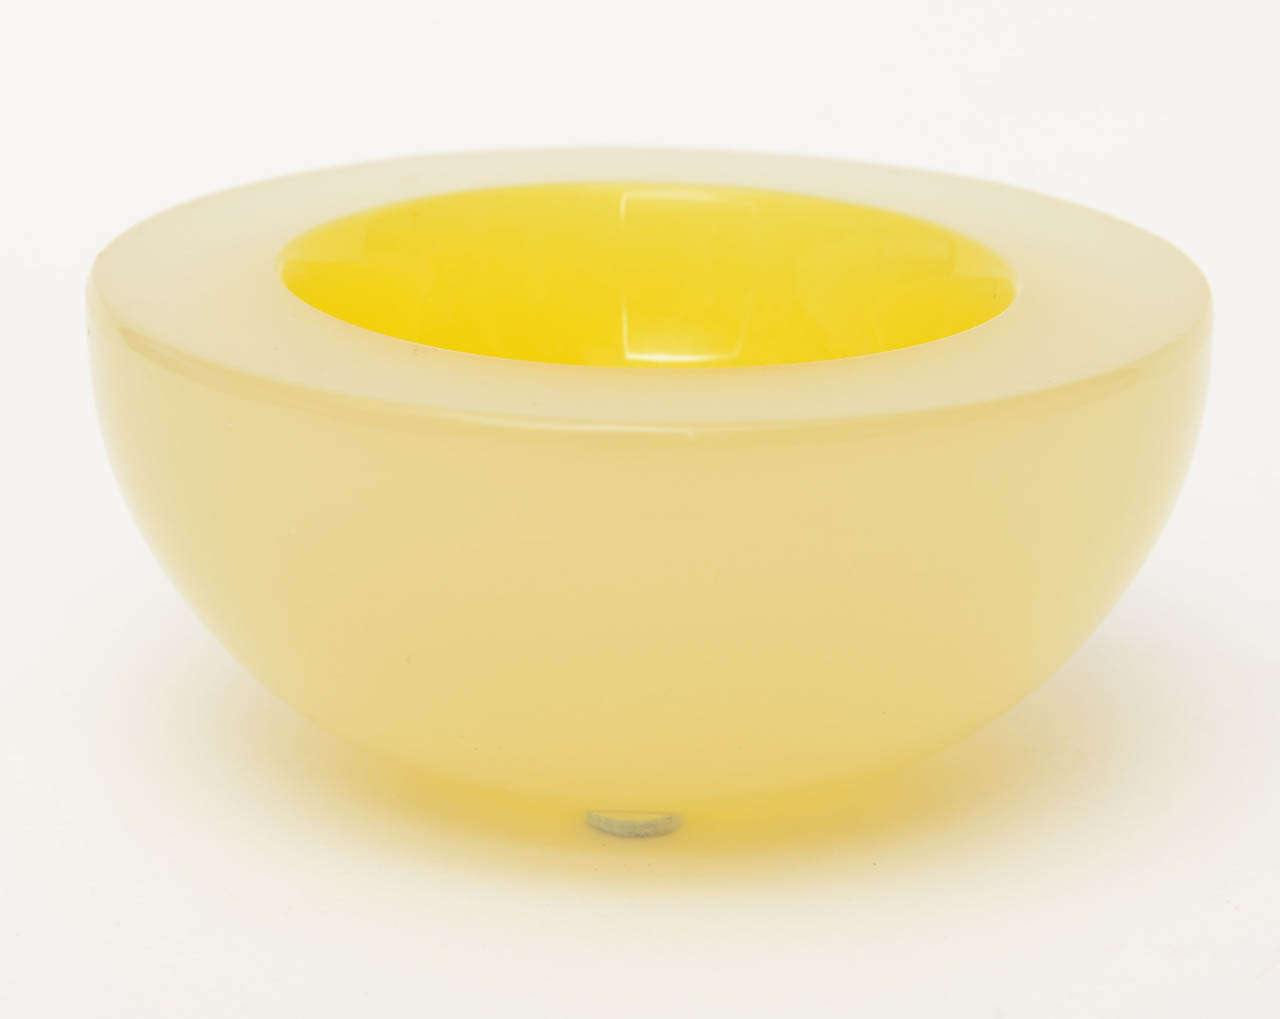 Two shades of contrasting yellow.... Lovely small Italian Murano glass geode bowl. Polished top
Let the sun shine In.....